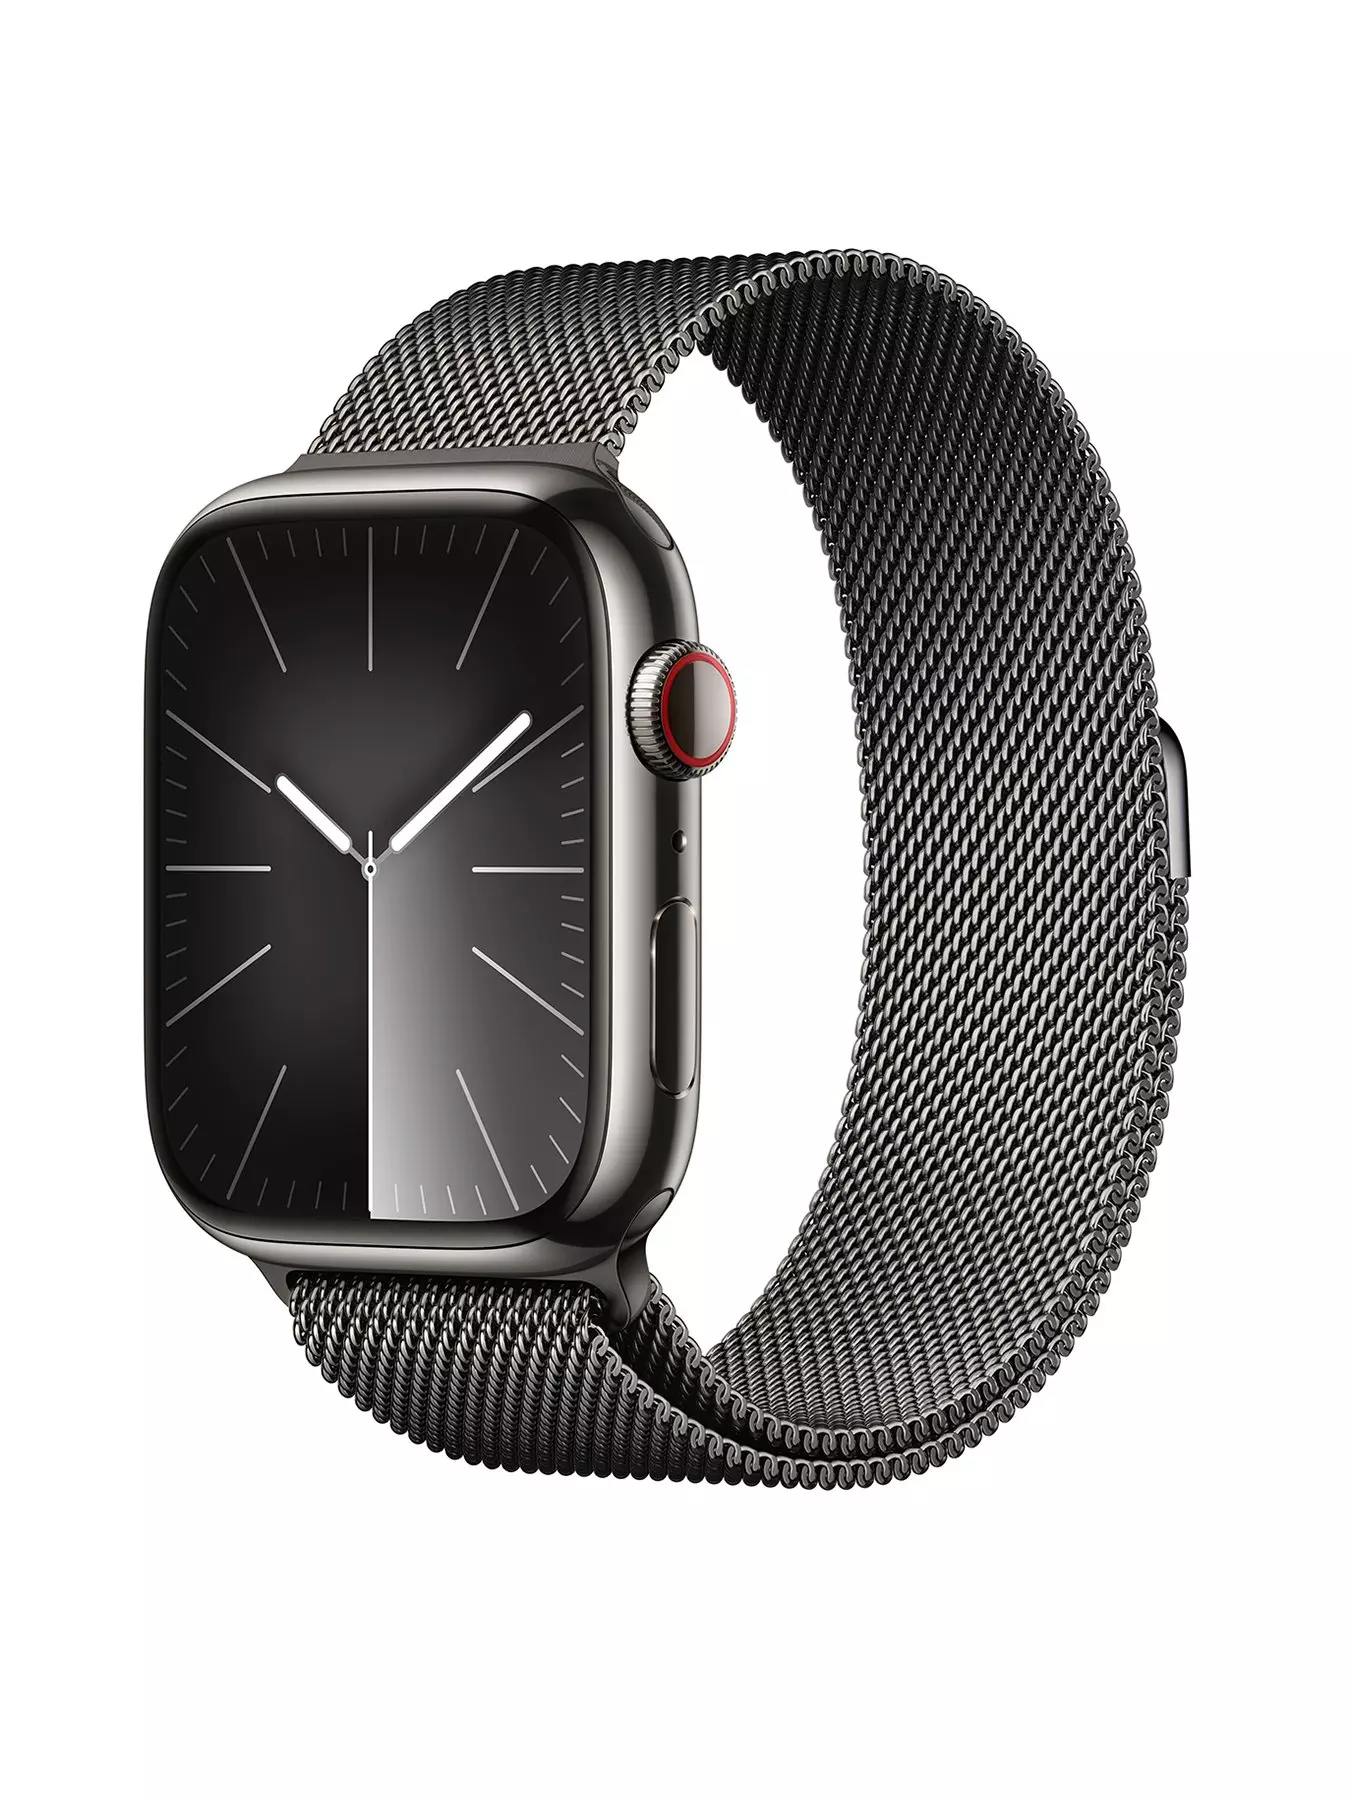 Smart Watches | Smartwatches | Apple & Android Very